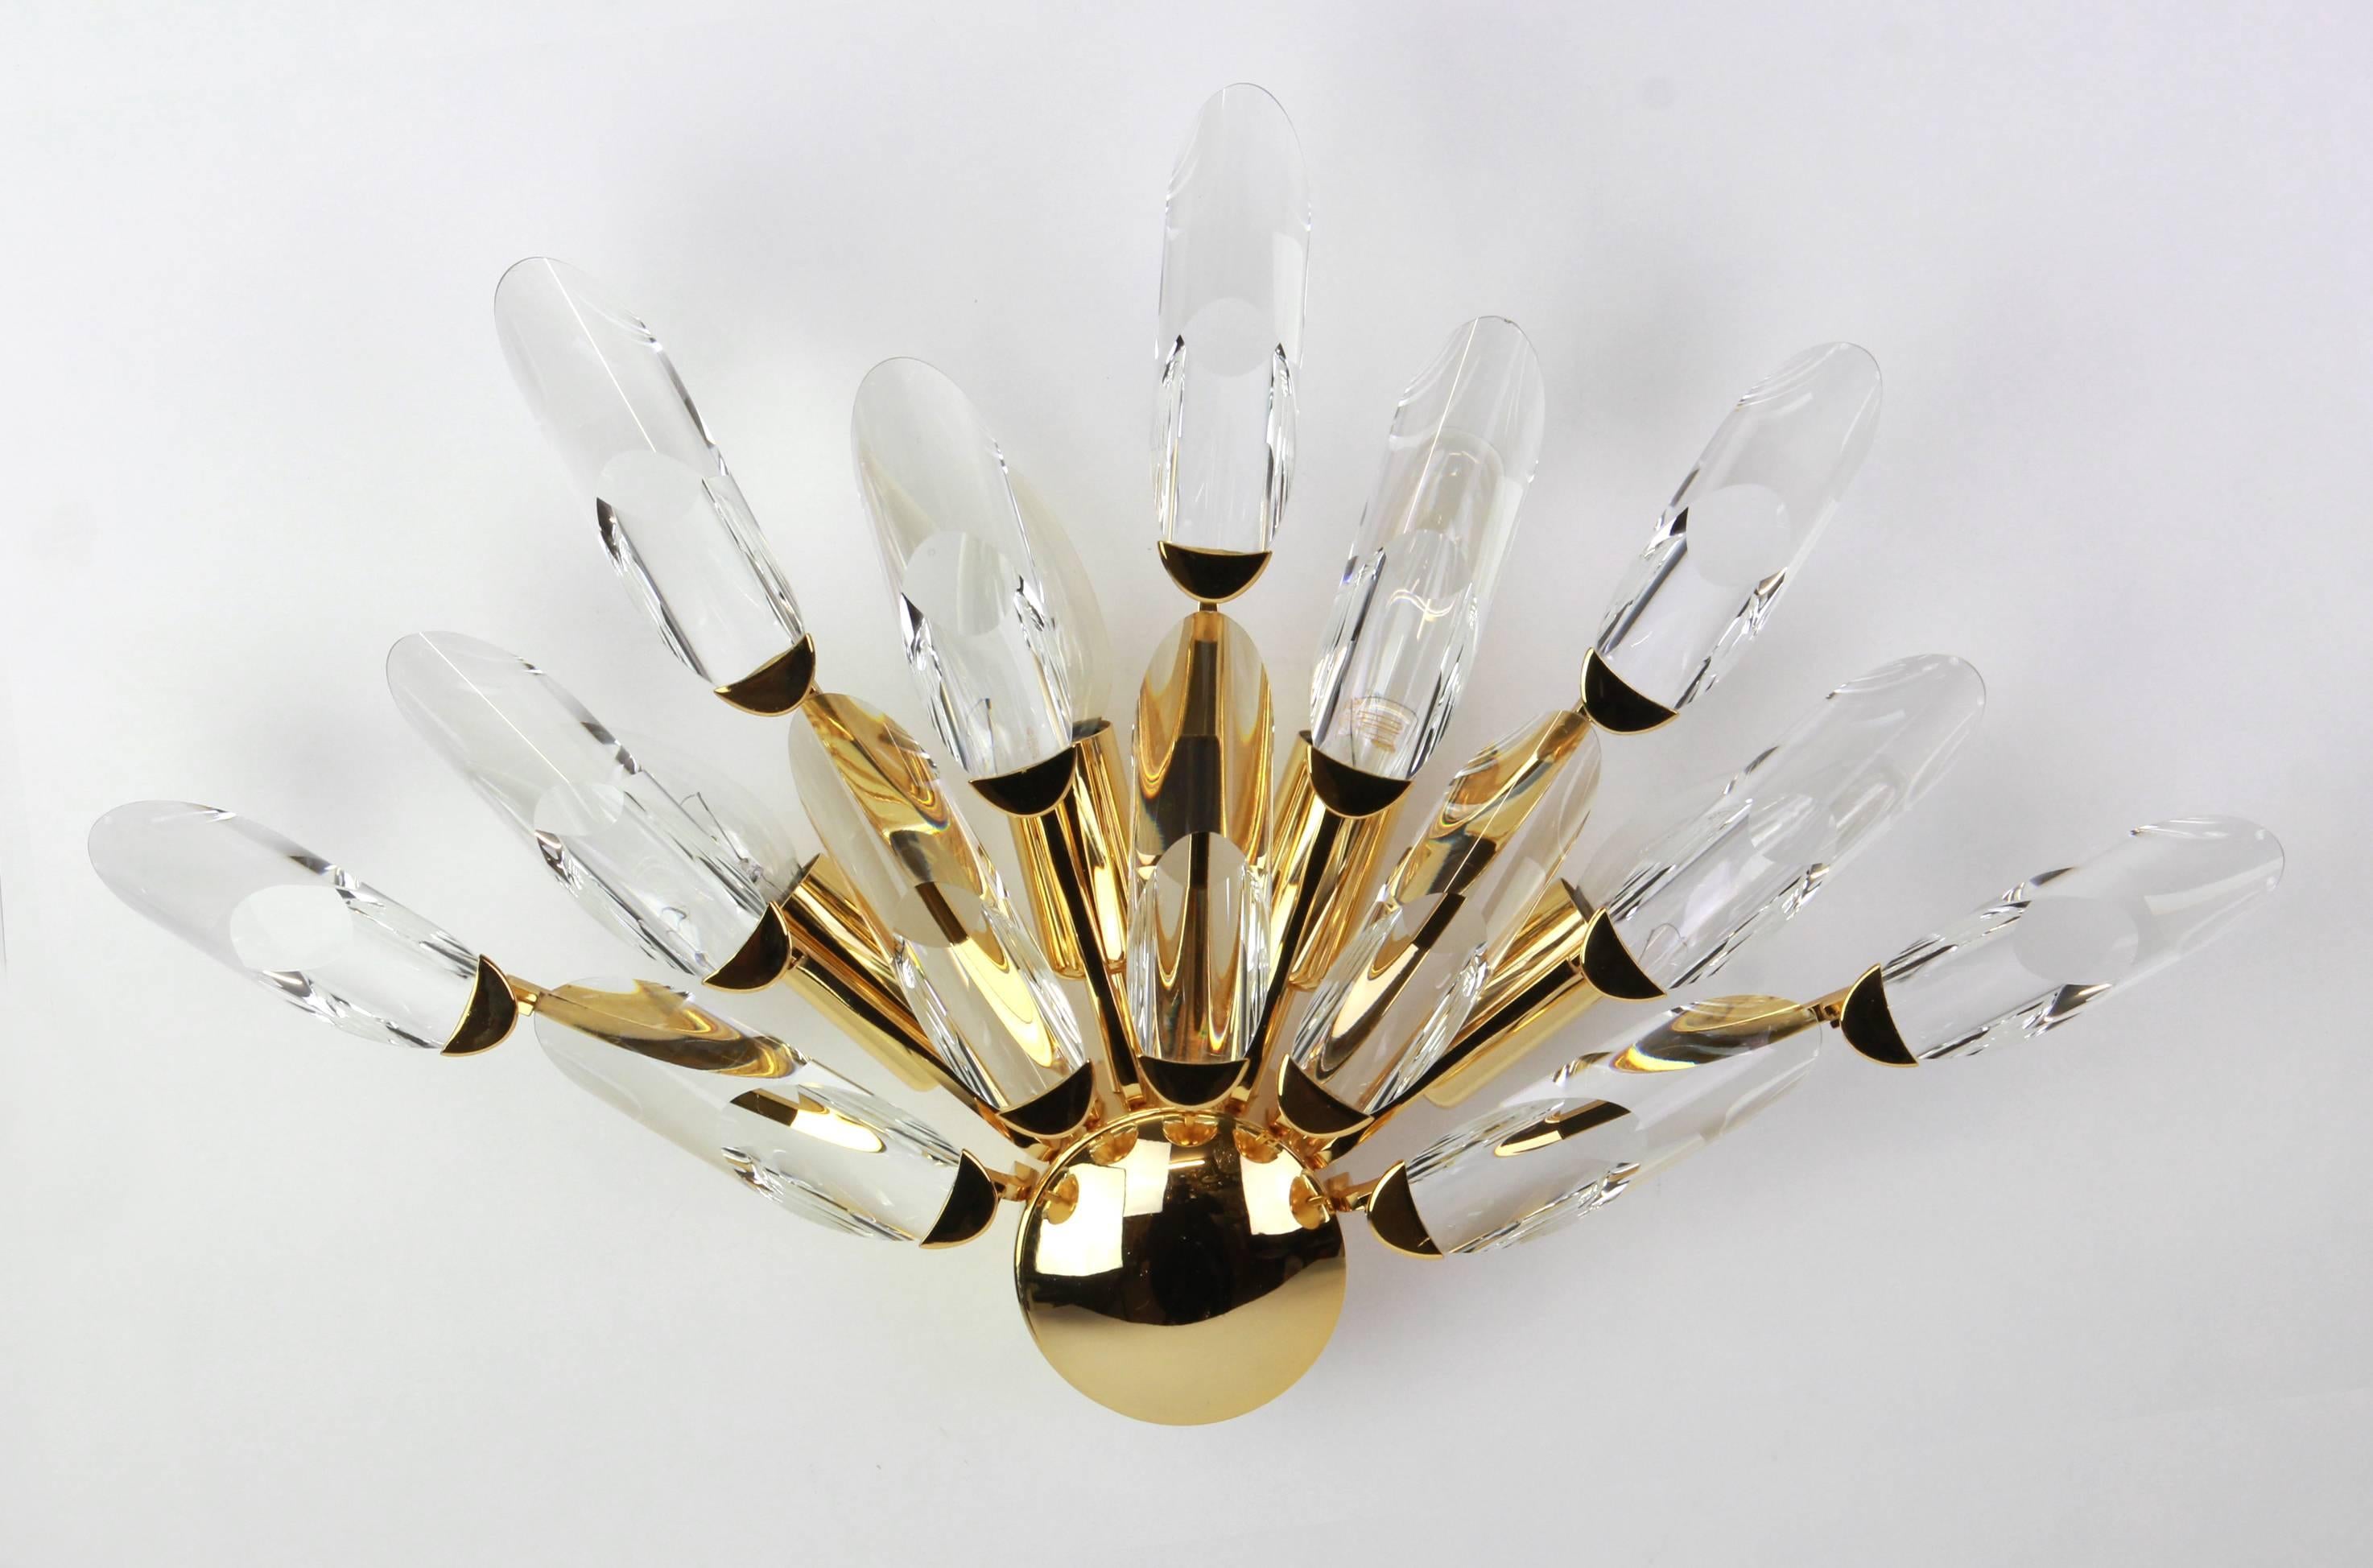 Stunning wall light by Stilkronen, Italy, manufactured in Mid-Century ( 1960s / 1970s). It is made of gold-plated( 24 Carat) brass with cut glasses.

High quality and in very good condition. Cleaned, well-wired and ready to use. 

The fixture